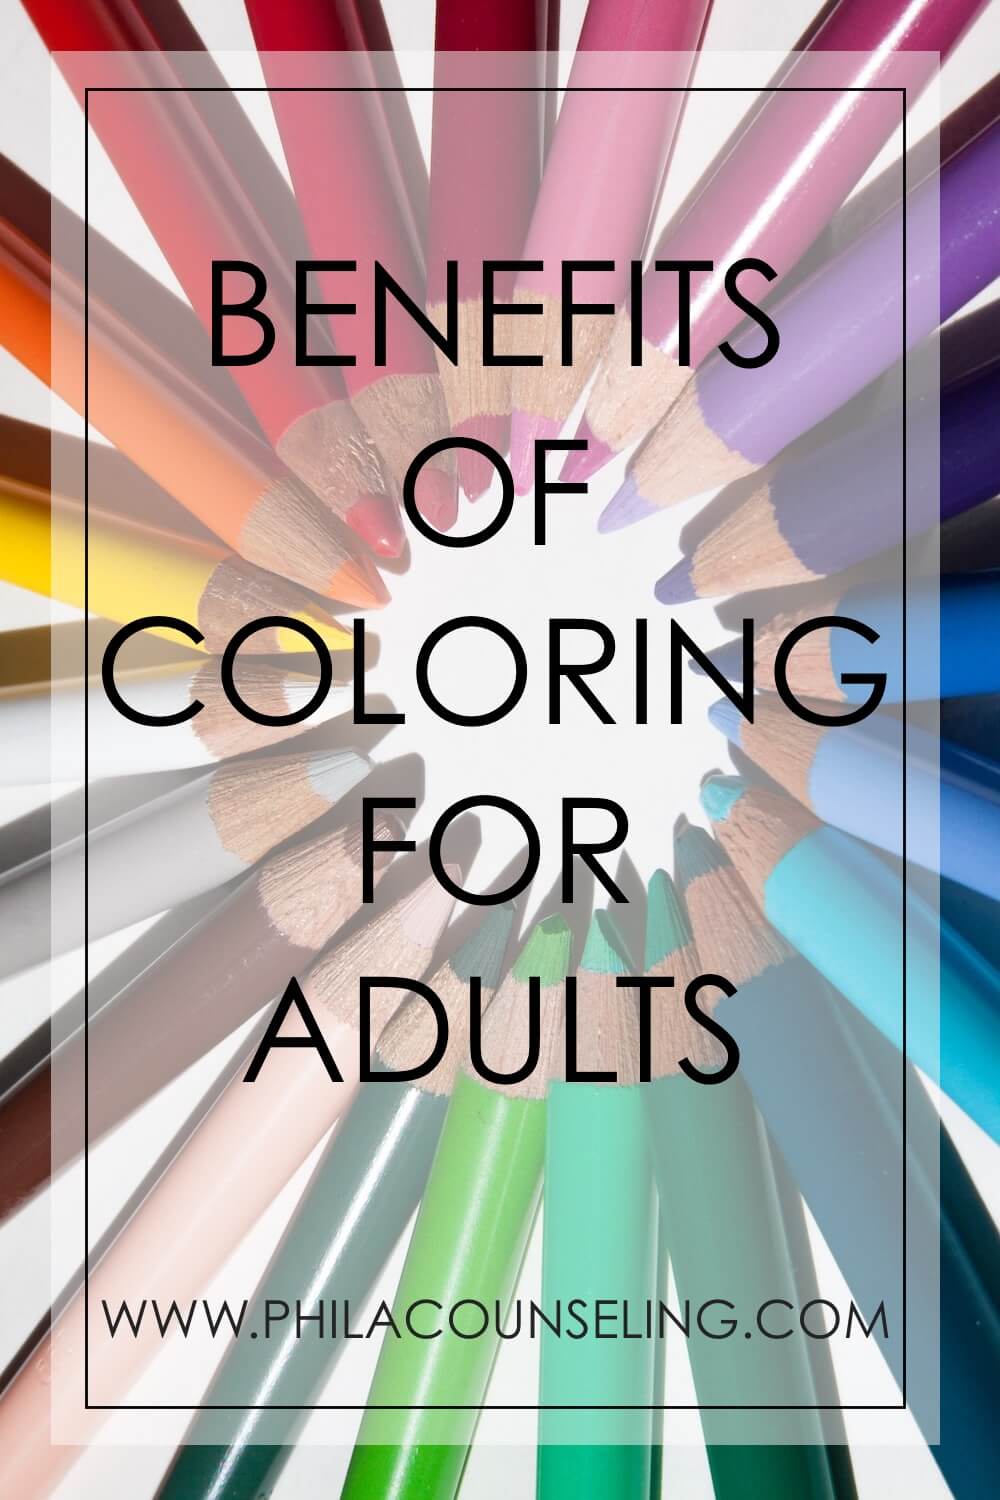 BENEFITS OF COLORING FOR ADULTS